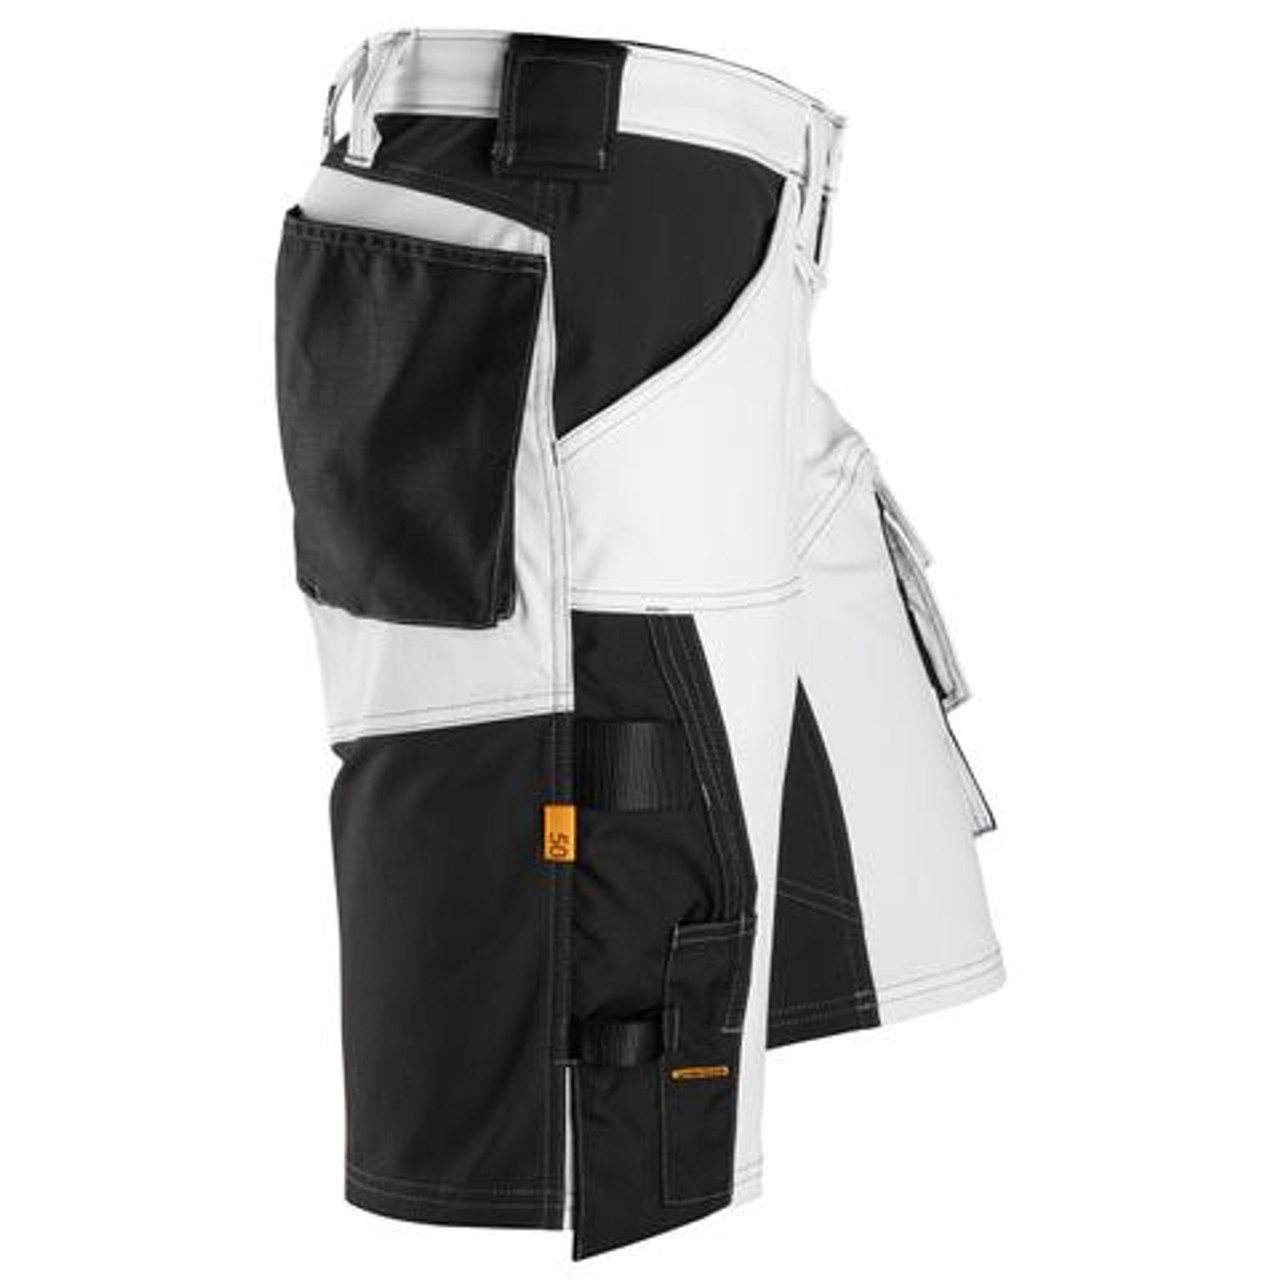 Suitable work Shorts available in Australia and New Zealand SNICKERS Cotton with Stretch White Shorts for Electricians